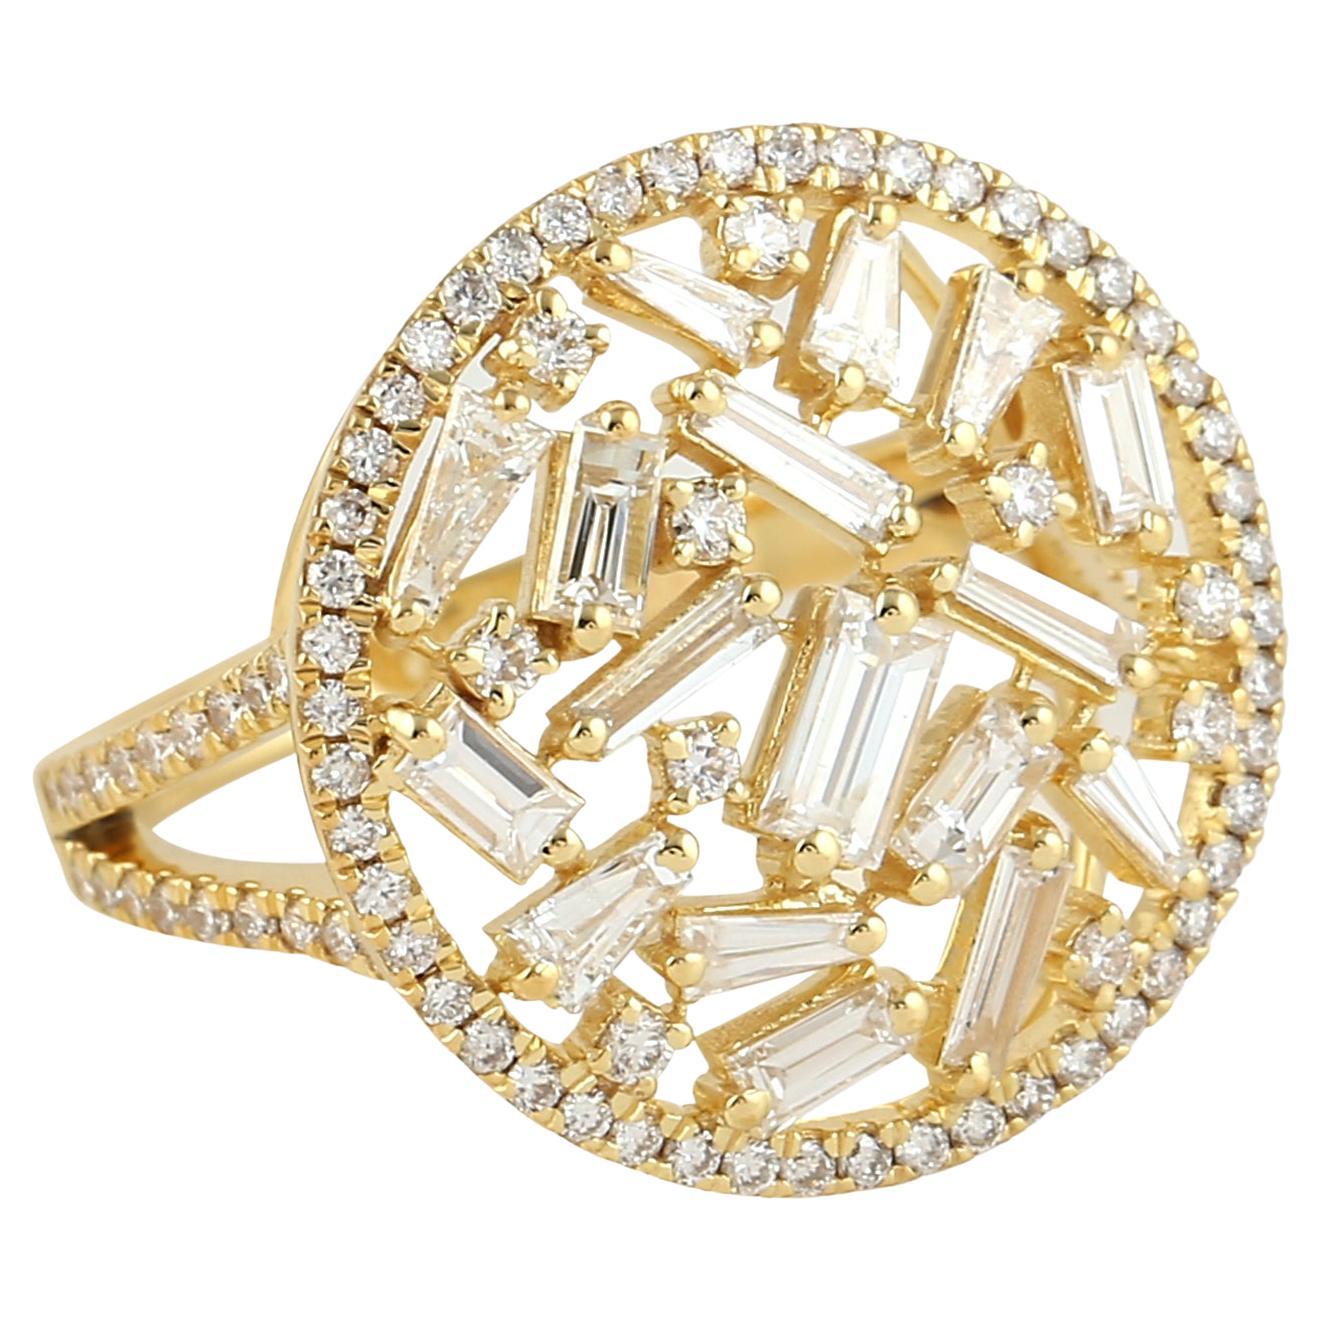 Baguette Diamonds Ring Made In 18k Yellow Gold For Sale